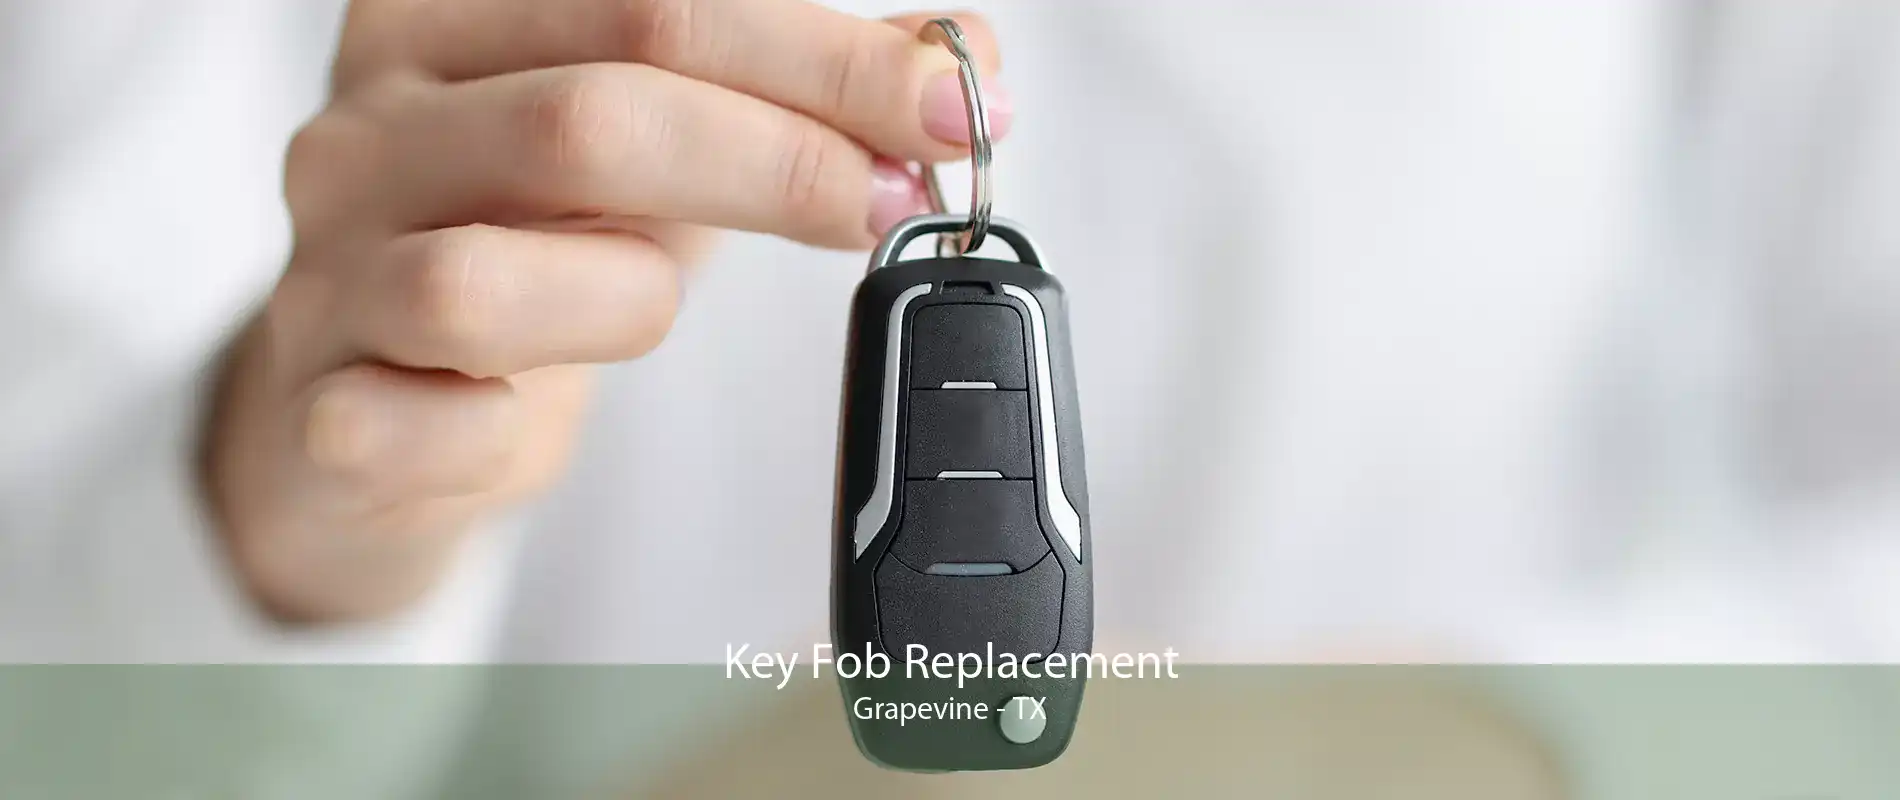 Key Fob Replacement Grapevine - TX